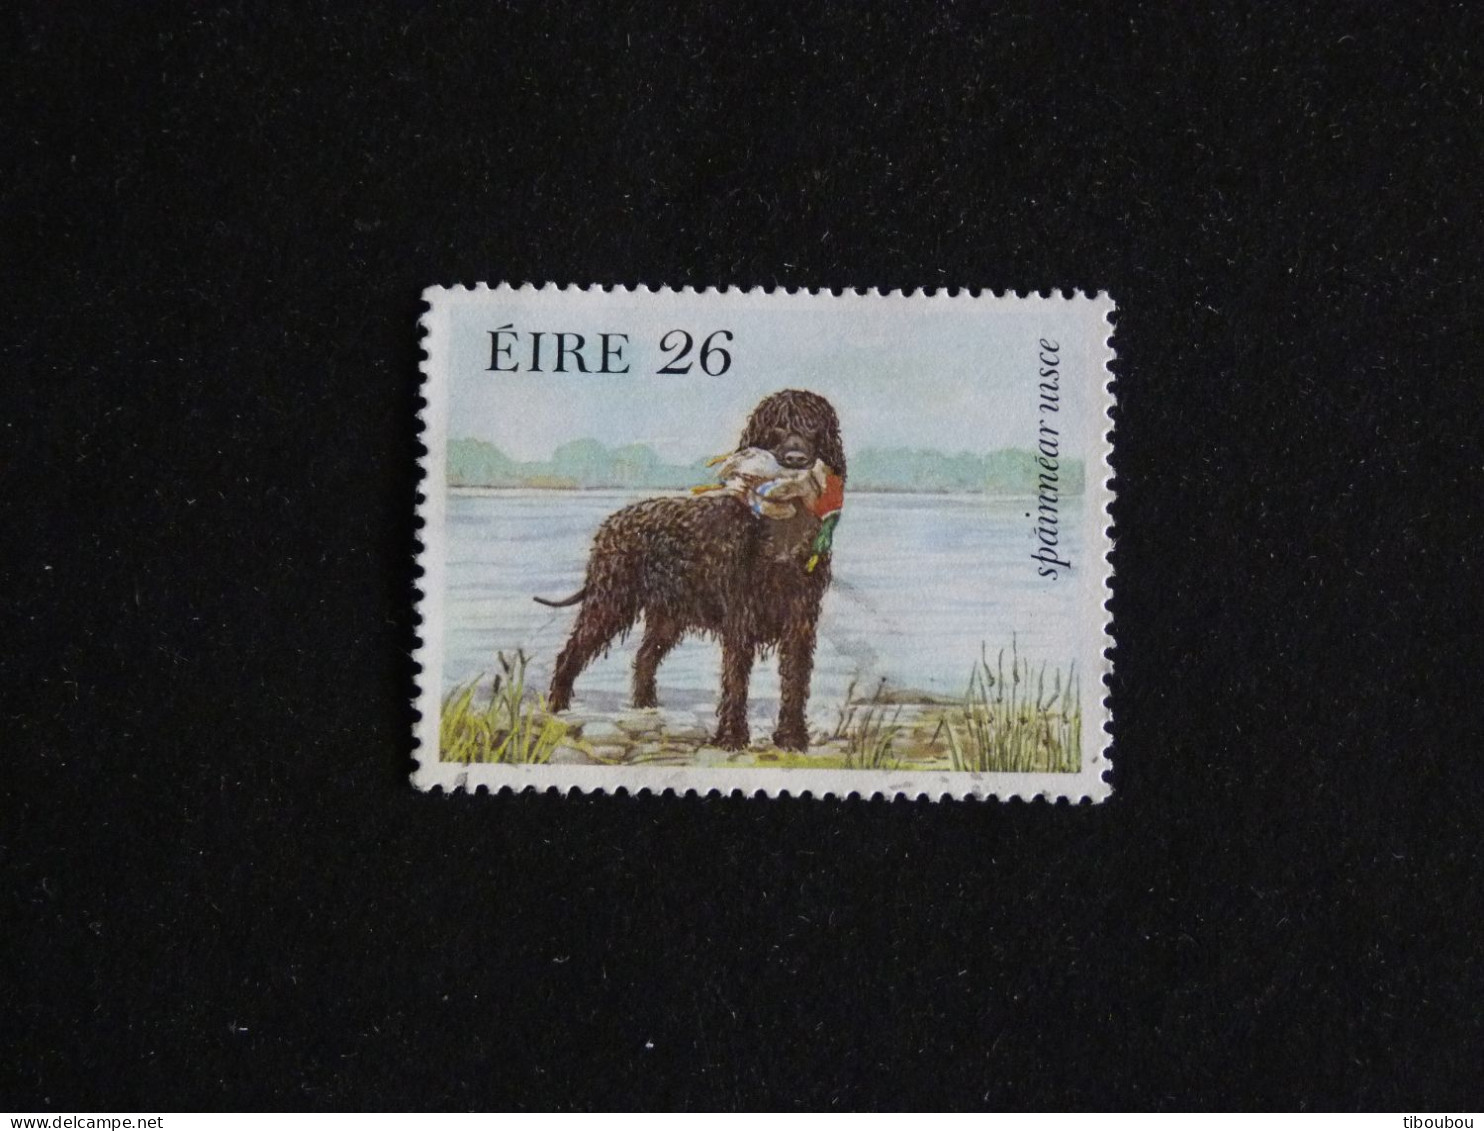 IRLANDE IRELAND EIRE YT 508 OBLITERE - EPAGNEUL CHIEN DOG HUND CHASSE HUNT - Used Stamps